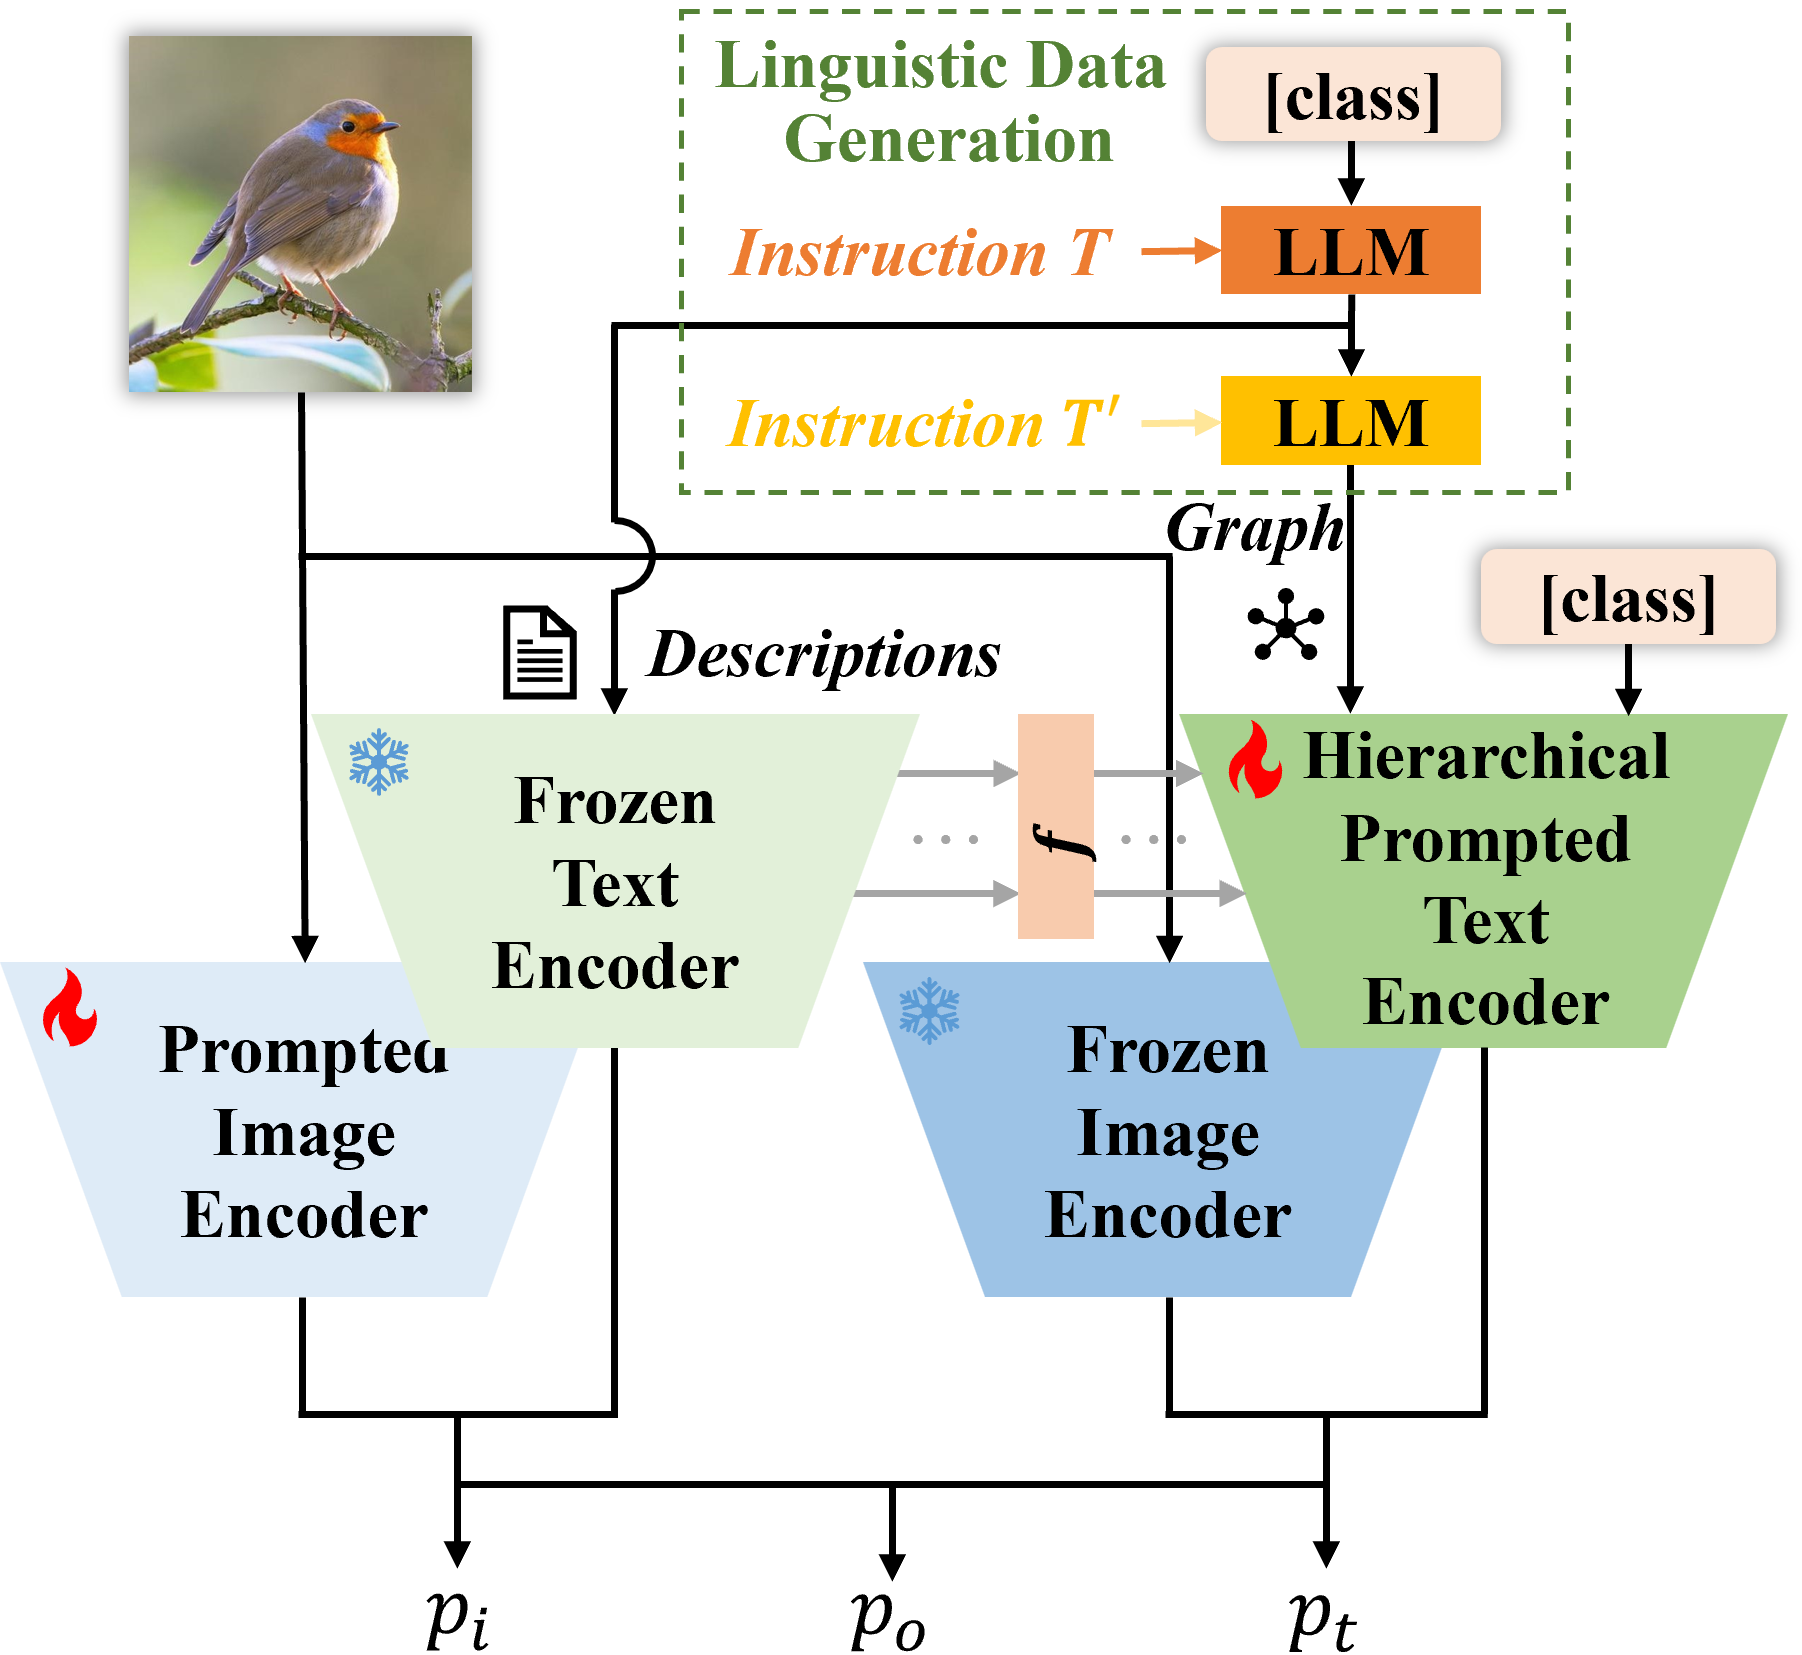 The overall framework of the proposed hierarchical prompt tuning.  Descriptions and relationship-guided graphs with class names are used as input for the frozen text encoder and the hierarchical prompted text encoder respectively. 